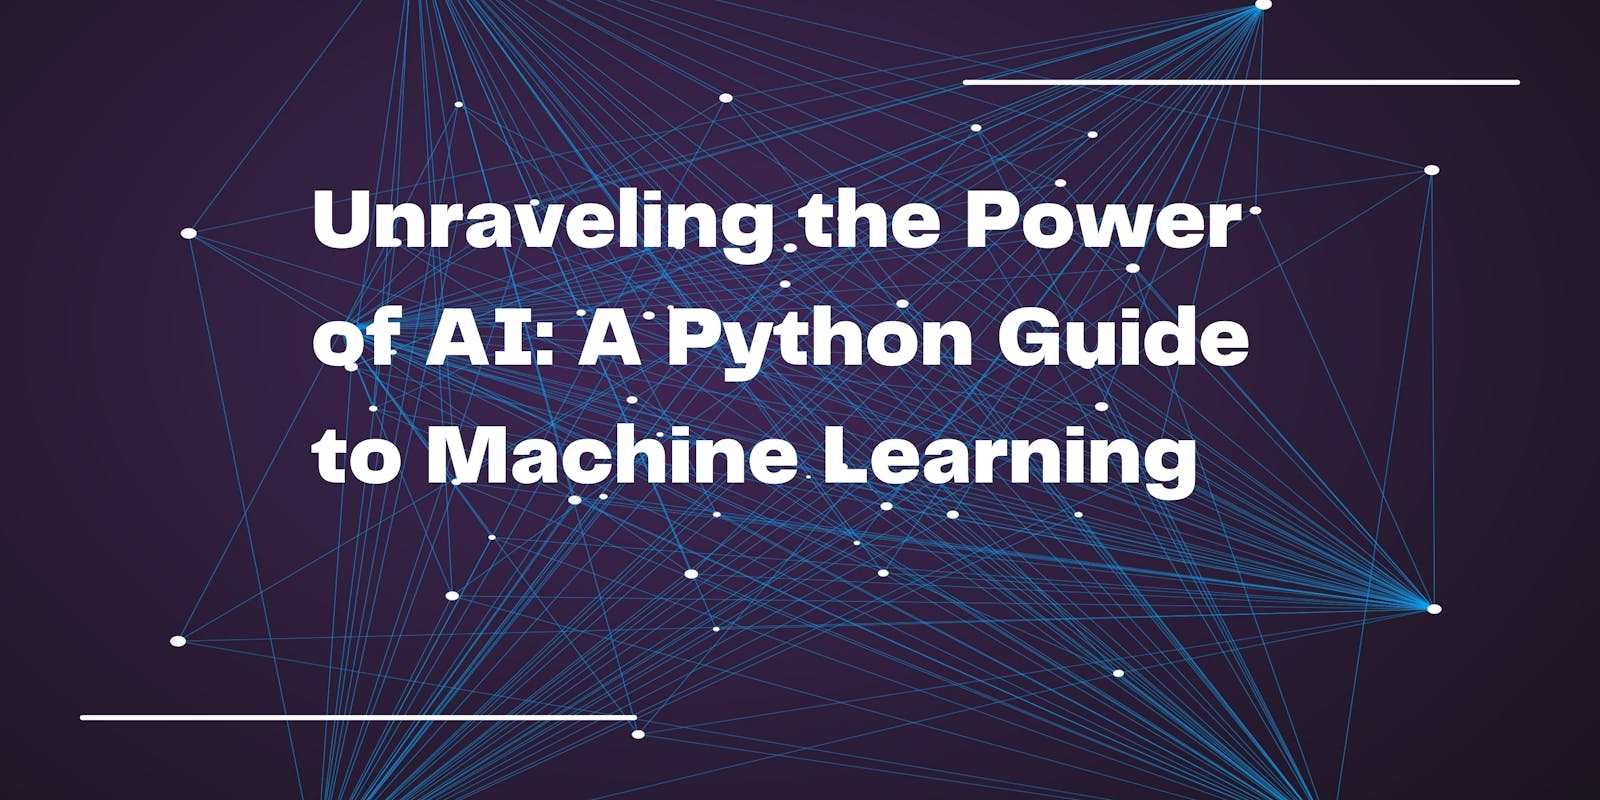 Unraveling the Power of AI: A Python Guide to Machine Learning